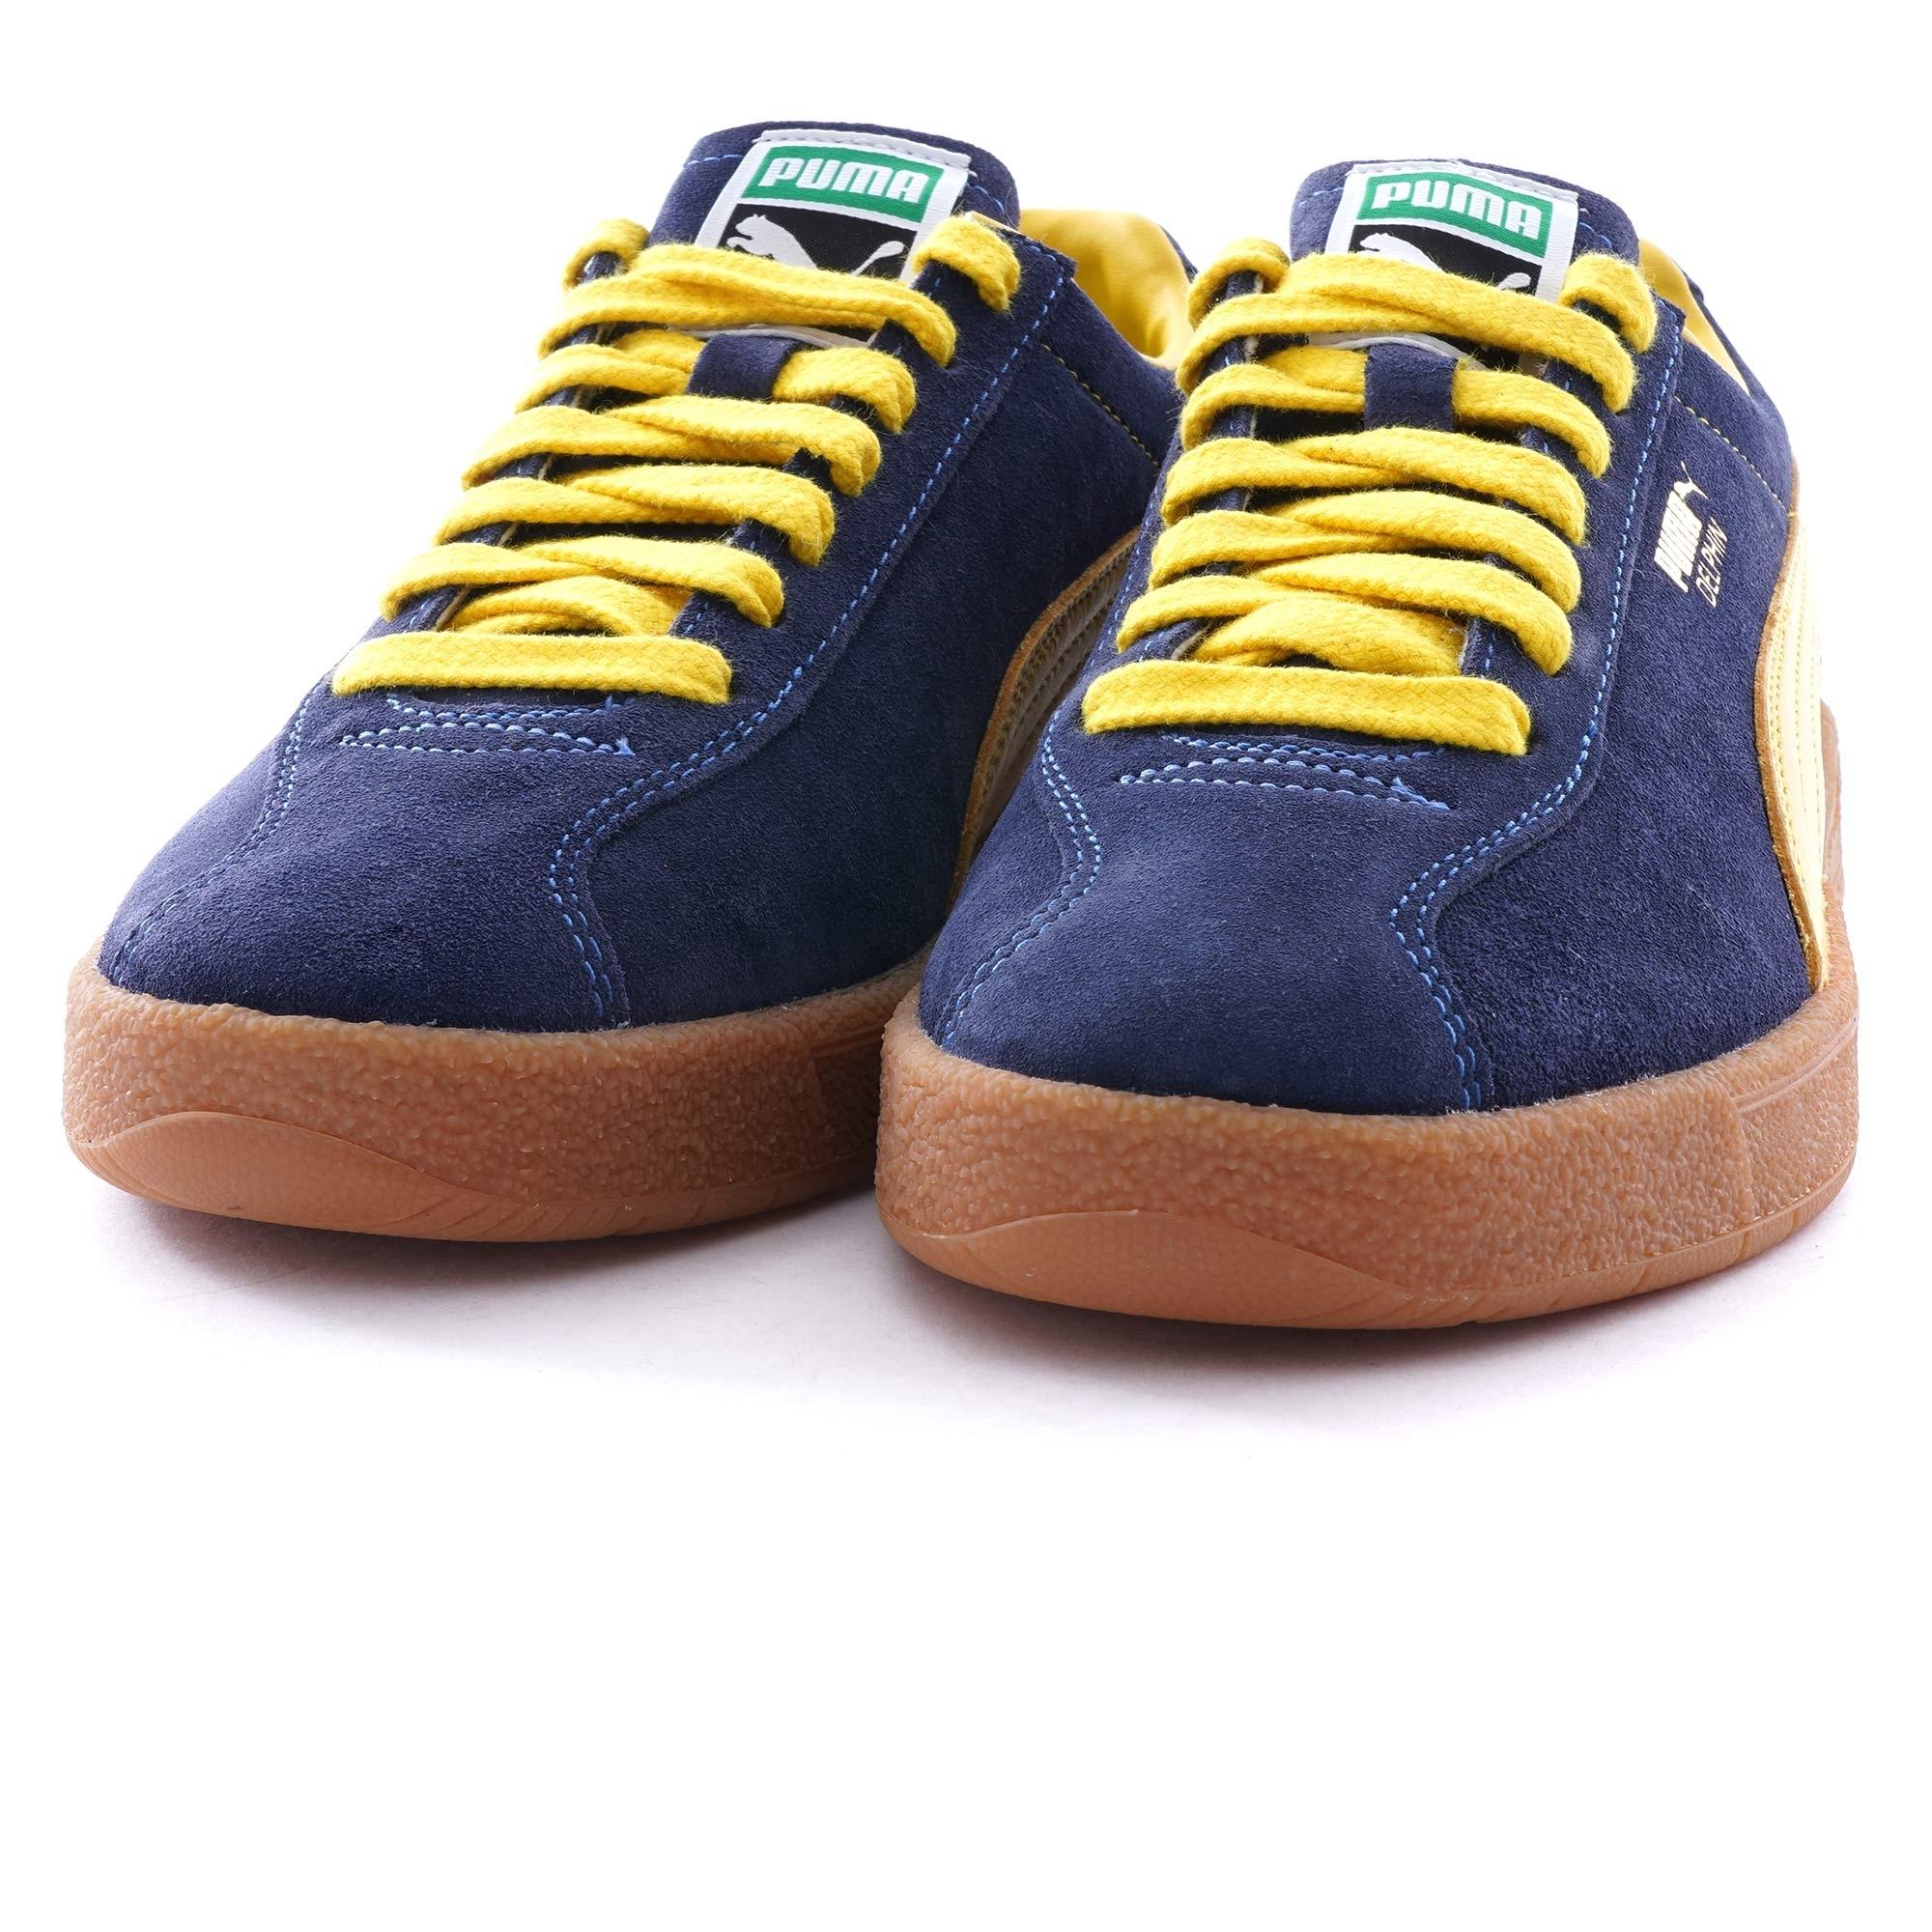 PUMA Suede Delphin Og in Navy/Yellow (Blue) for Men - Lyst